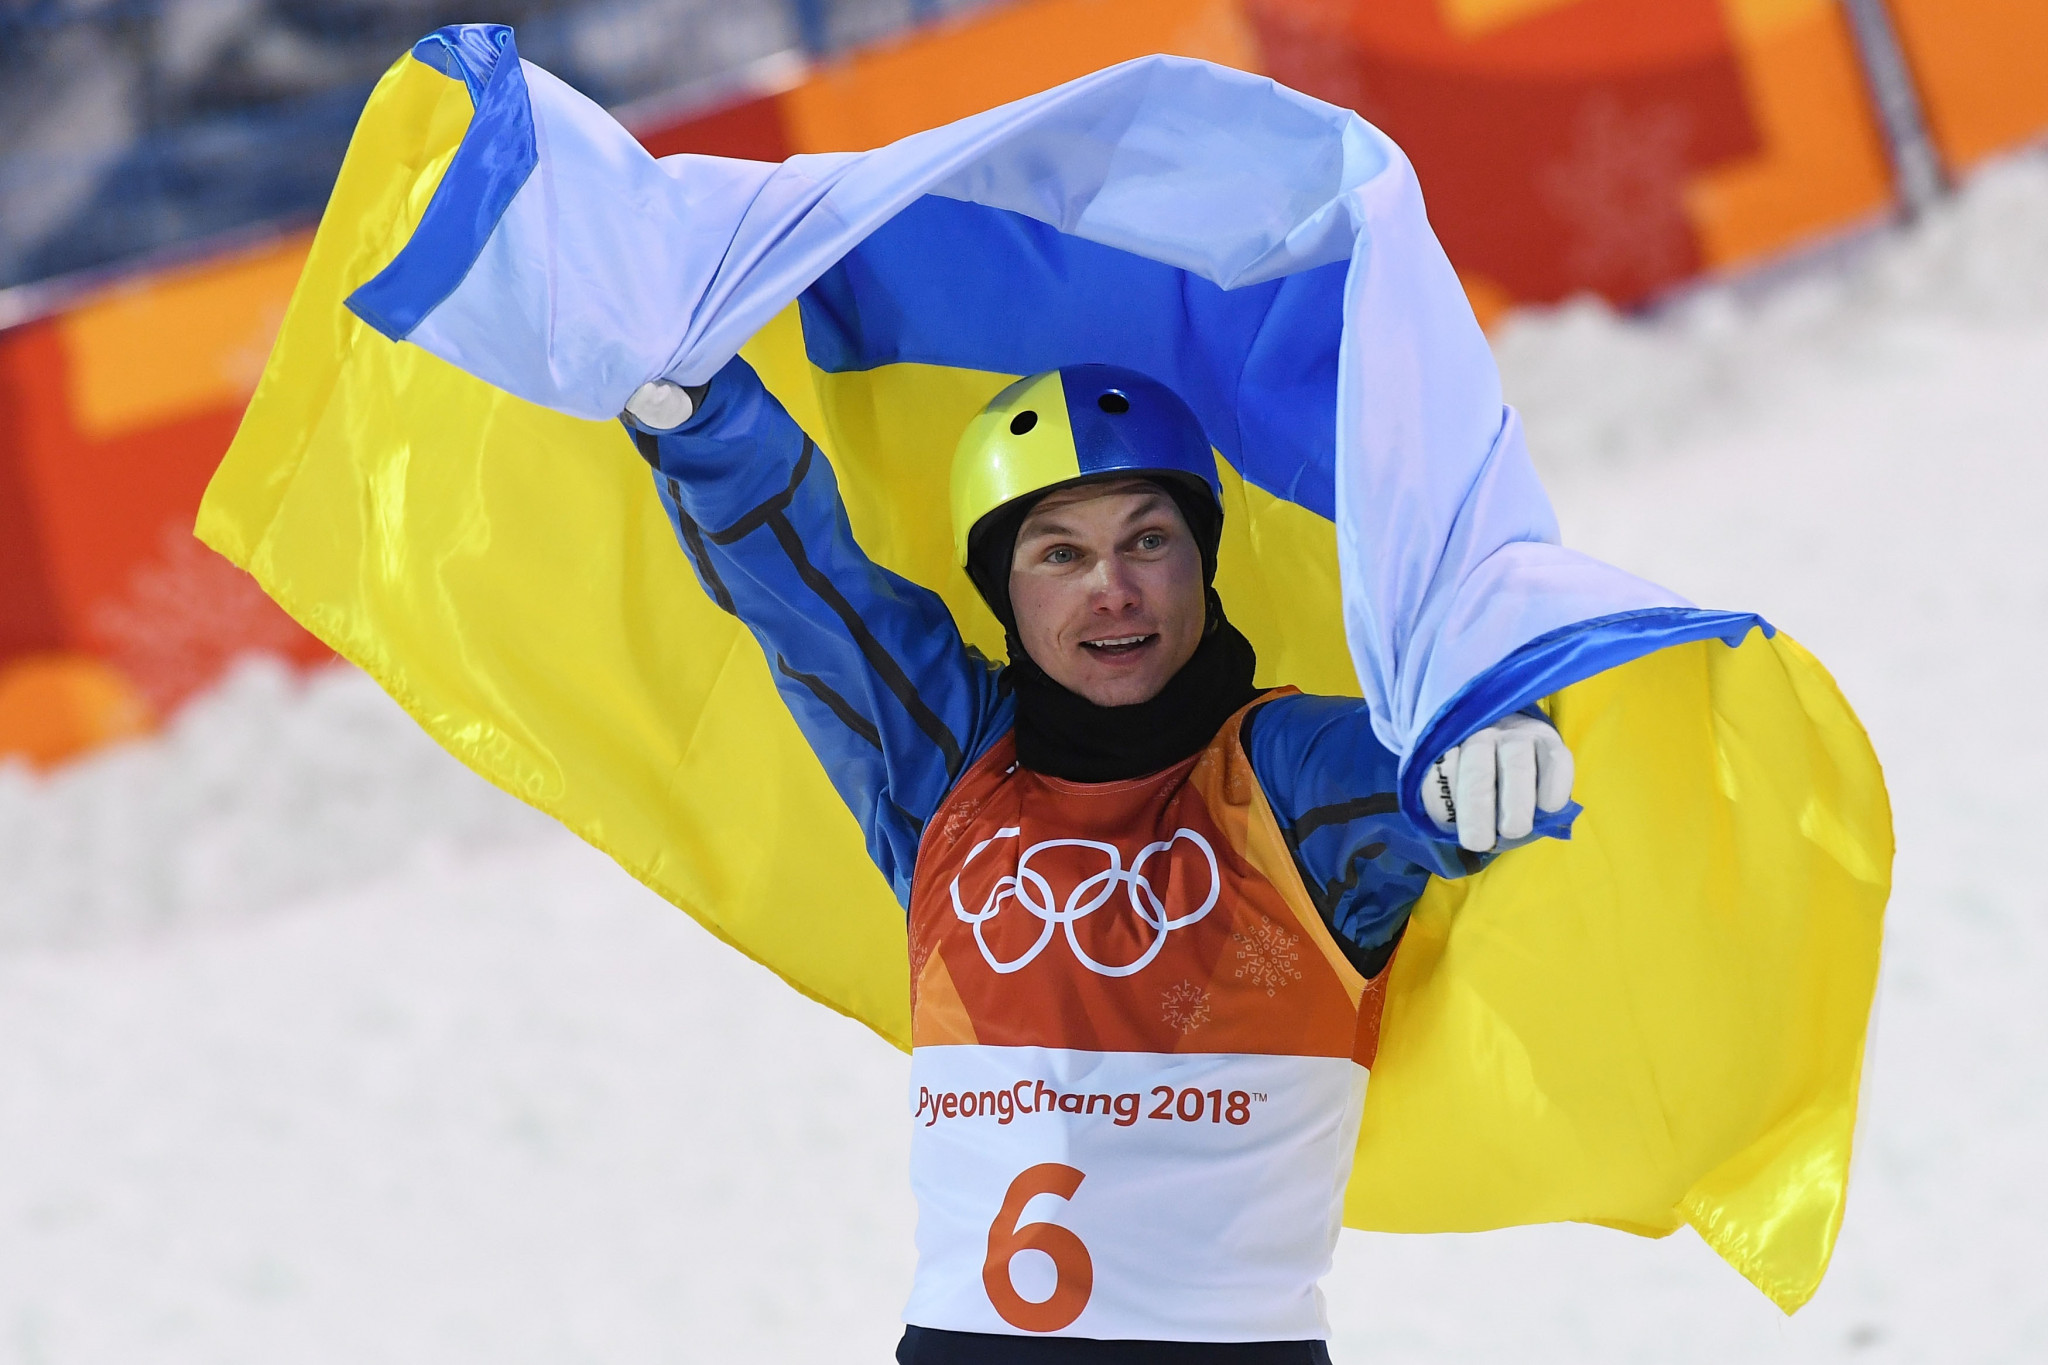 Oleksandr Abramenko captured gold for Ukraine in men's aerials at the Pyeongchang 2018 Winter Olympics ©Getty Images